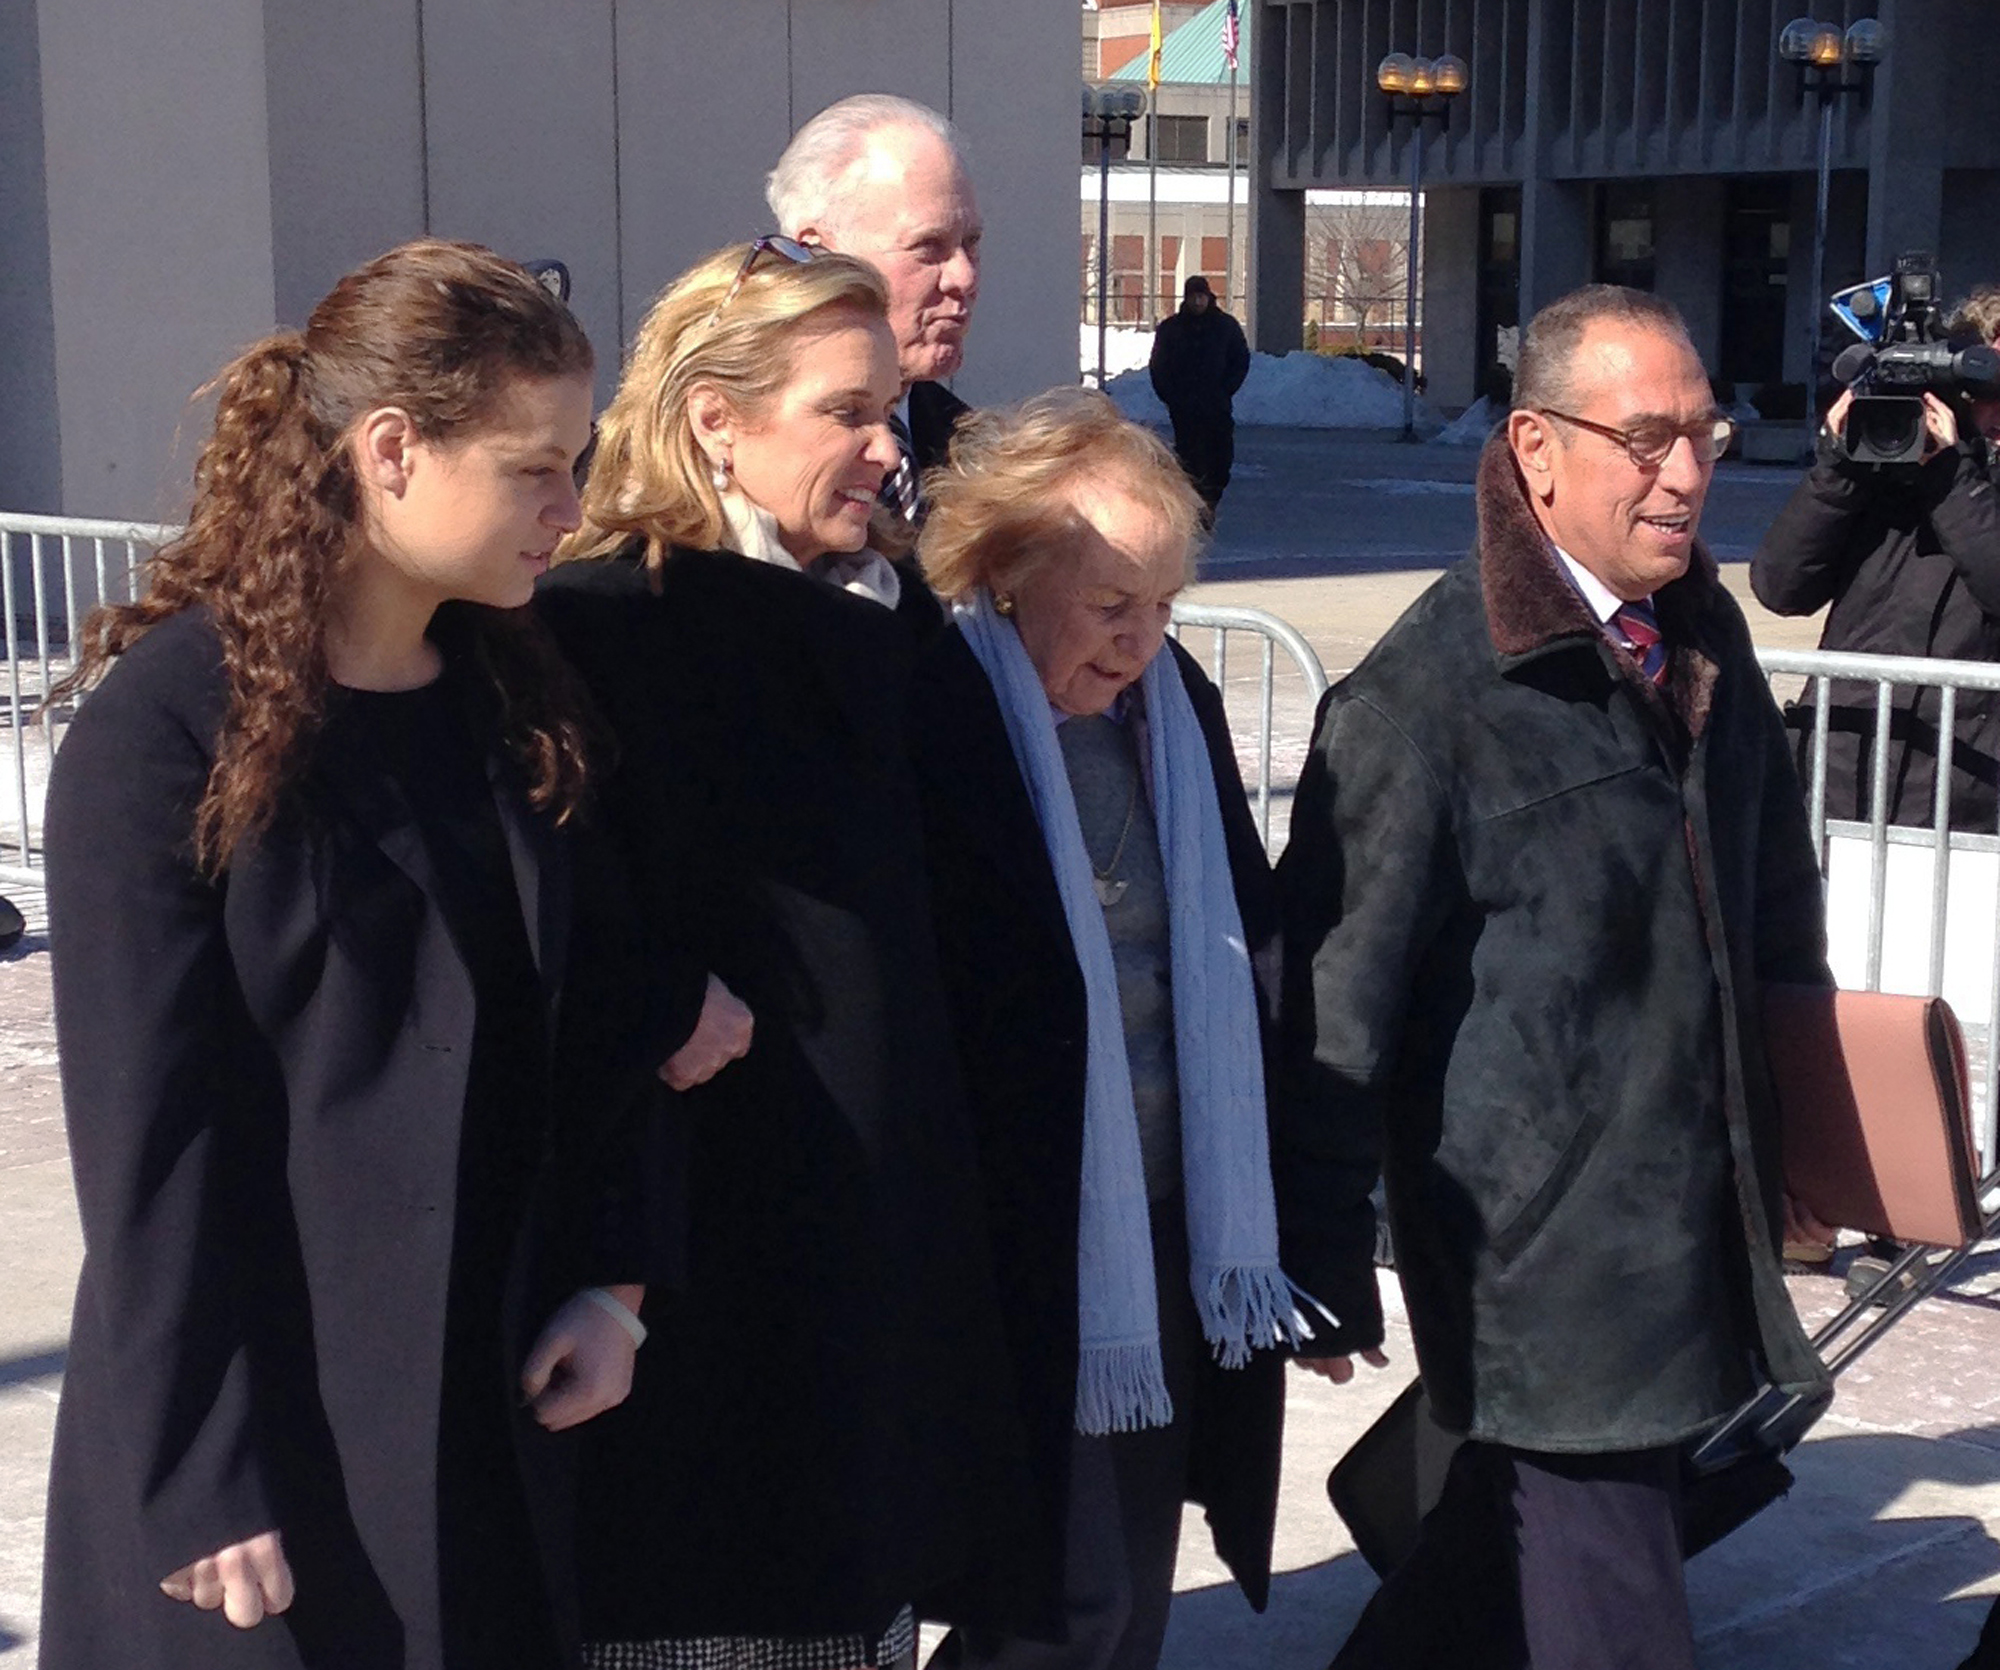 Kerry Kennedy, second from left, walks with her mother, Ethel Kennedy, third from left, as she leaves the Westchester County Courthouse, Friday, Feb. 28, 2014 in White Plains, N.Y. 